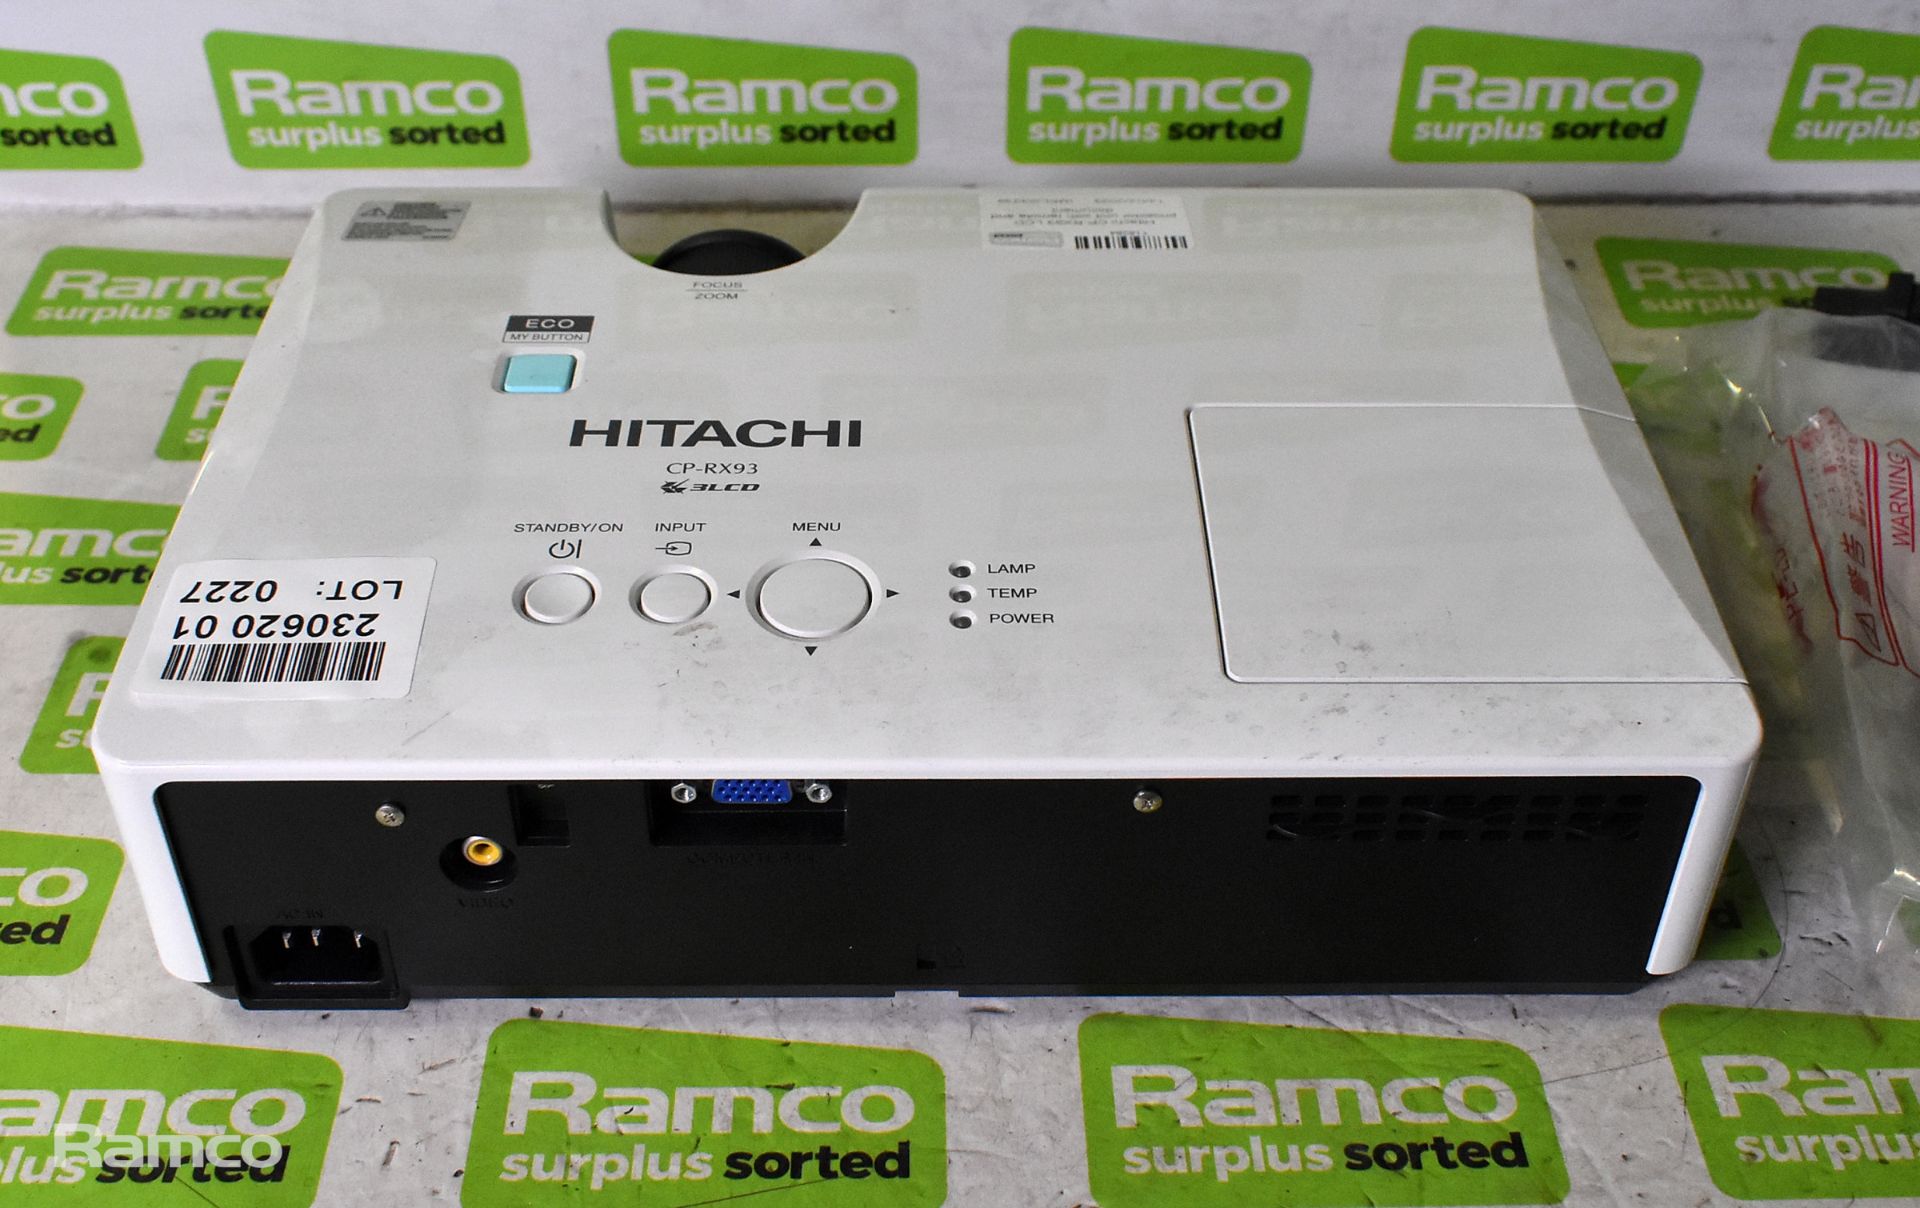 Hitachi CP-RX93 LCD projector unit with remote and document - Image 3 of 6